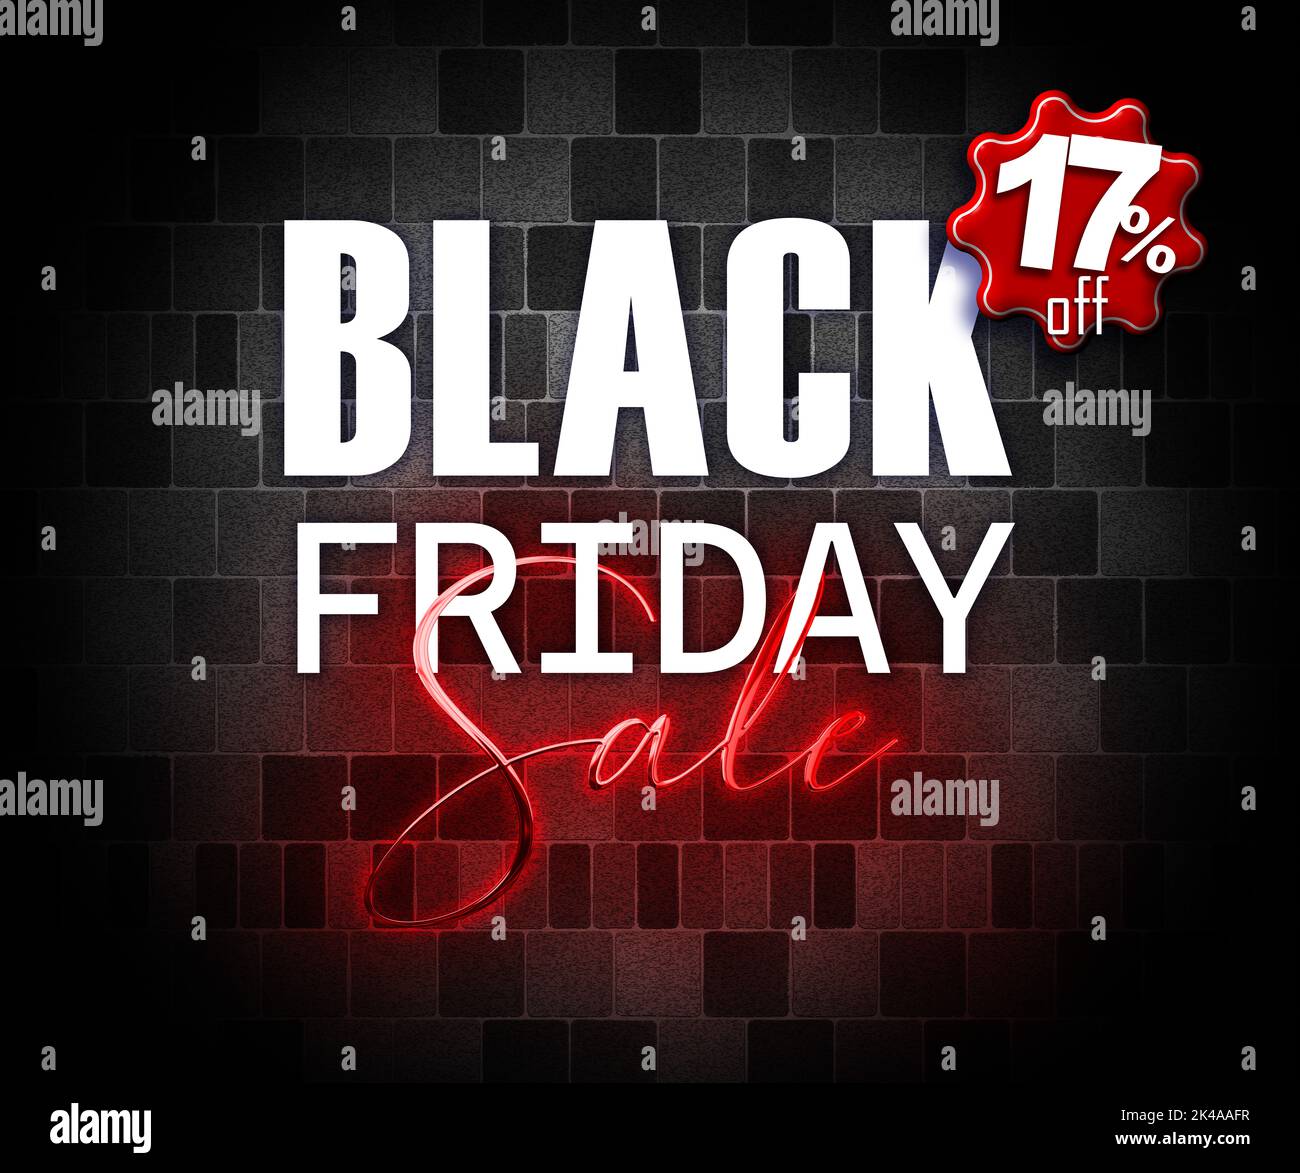 illustration with 3d elements black friday promotion banner 17 percent off sales increase Stock Photo